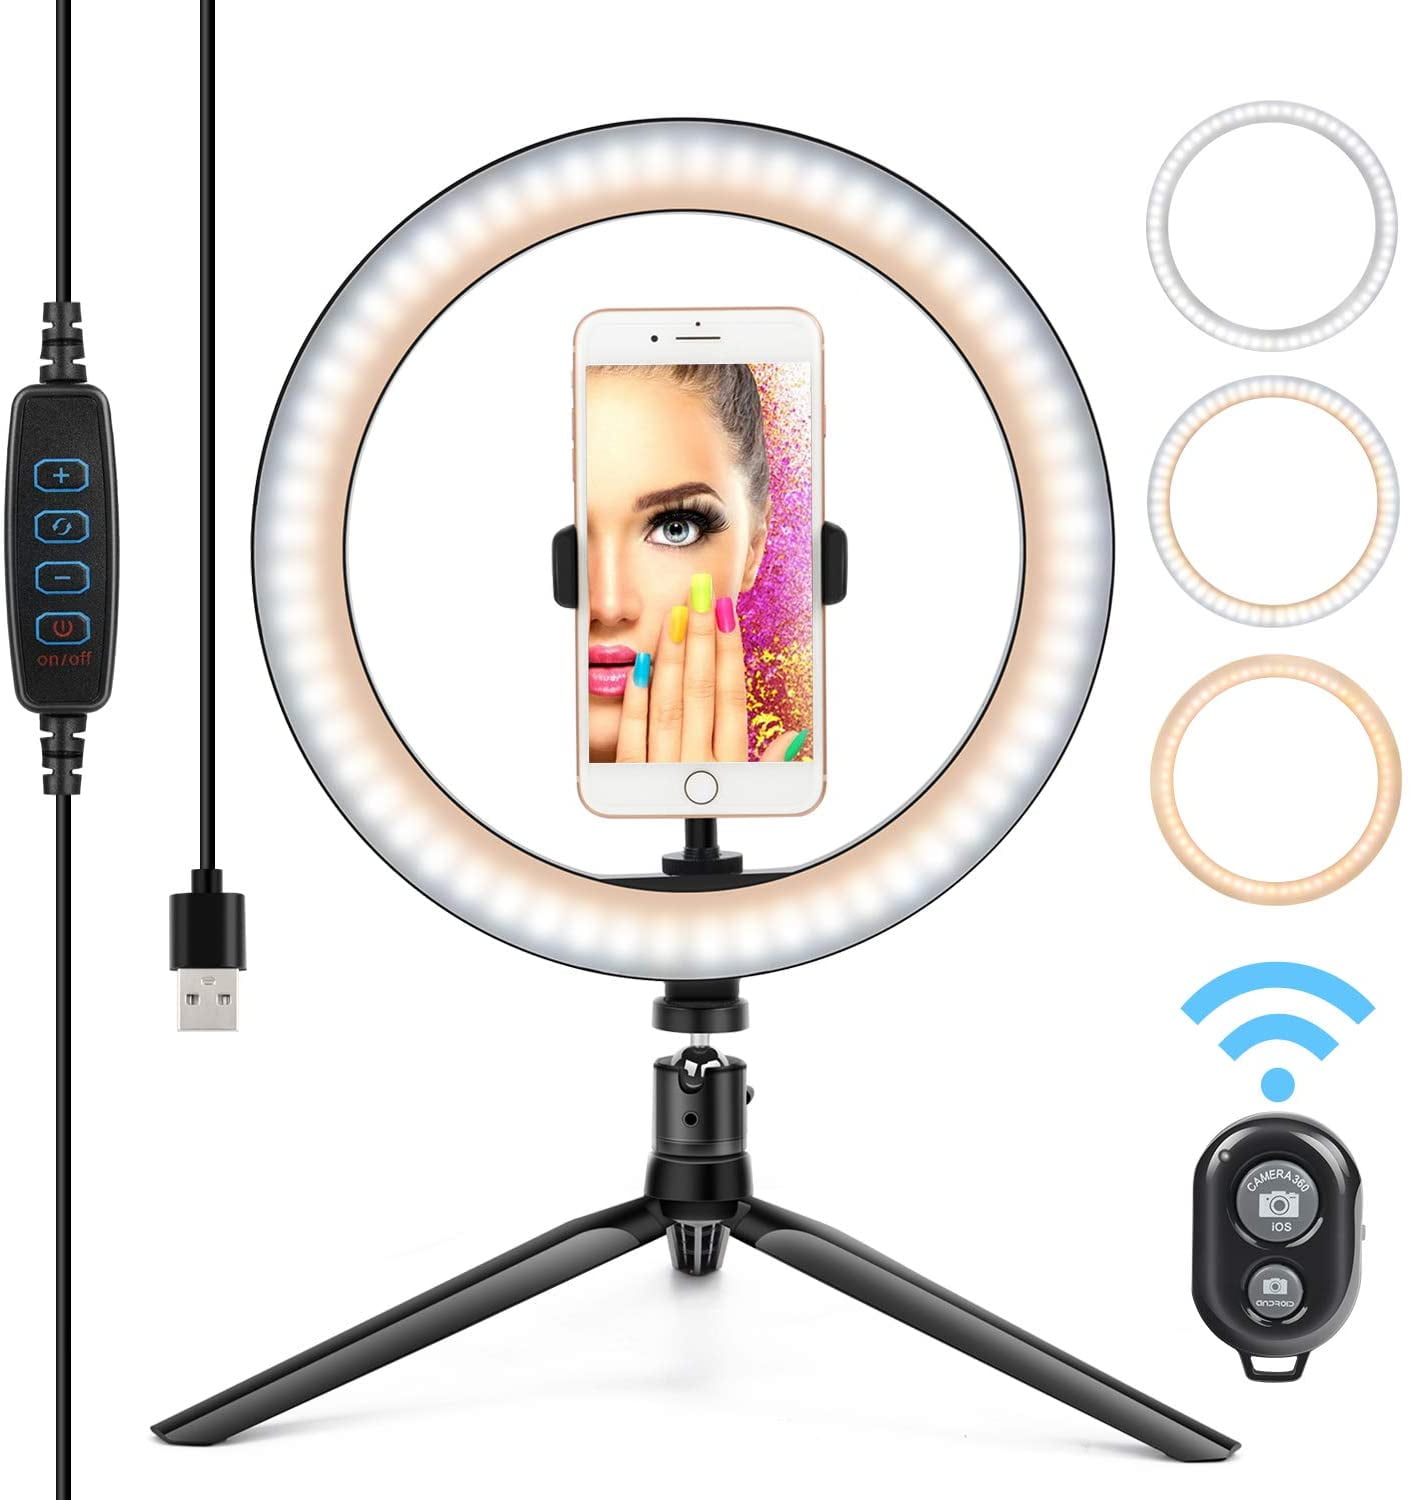 Including Self-Timer Remote Shutter Ubeesize Led Camera Light Flexible Long Arm JION Doost Ring Light with Mobile Phone Holder for Live and Makeup Compatible with Android Phone iPhone